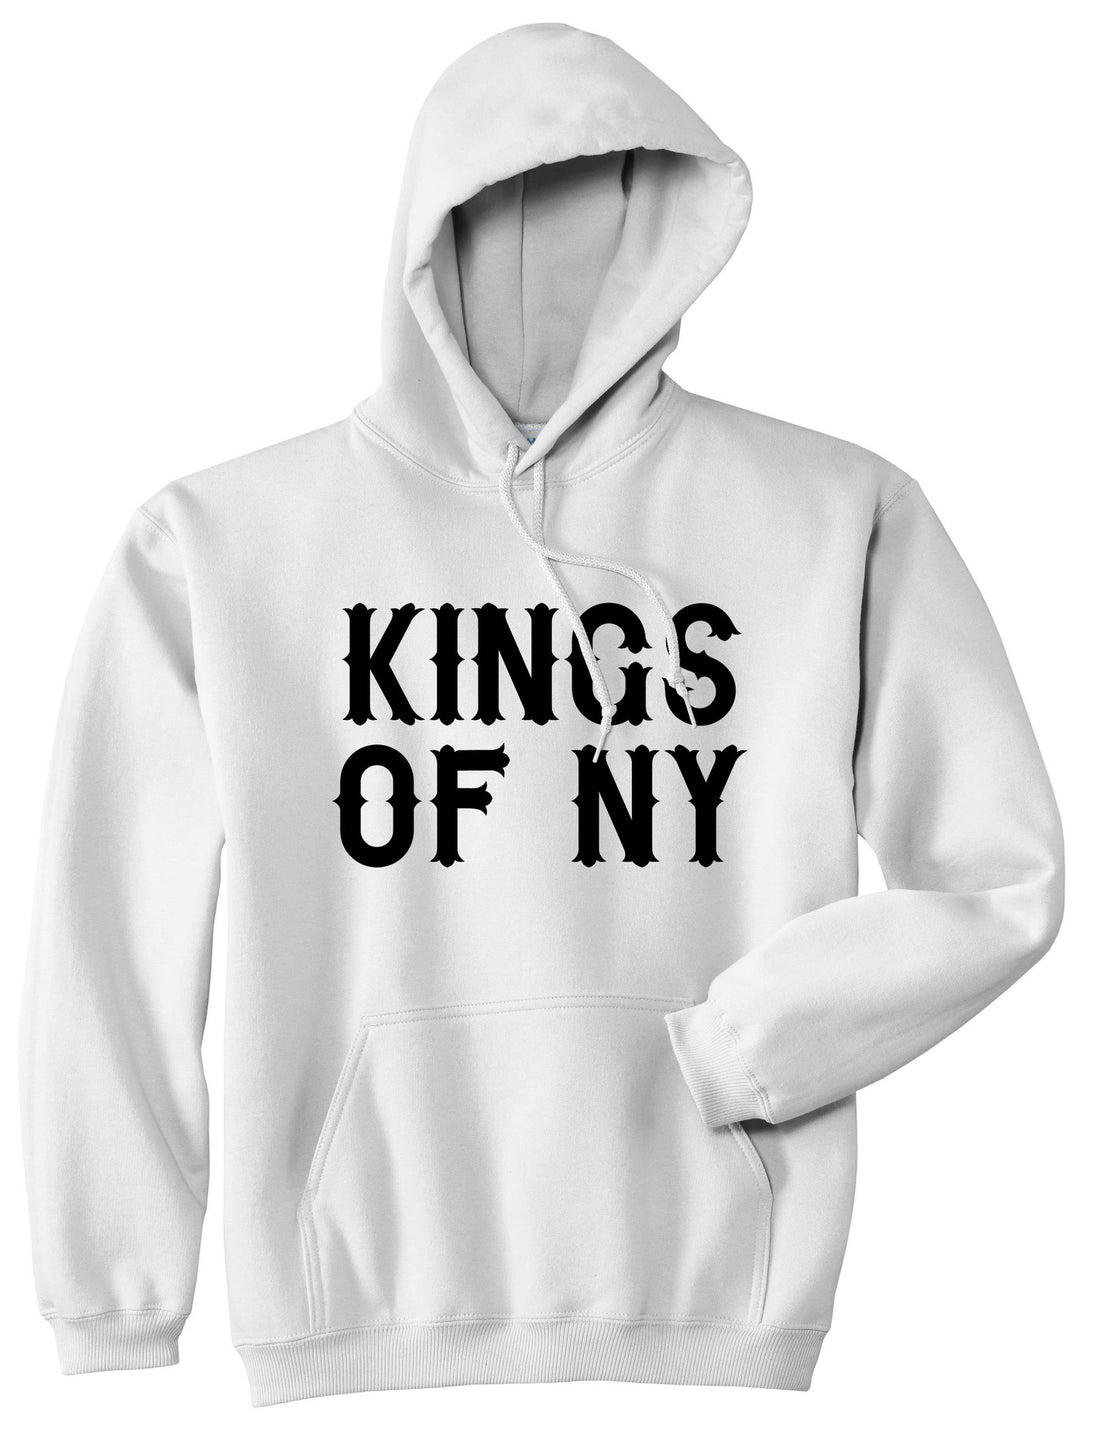 FALL15 Font Logo Print Pullover Hoodie Hoody in White by Kings Of NY